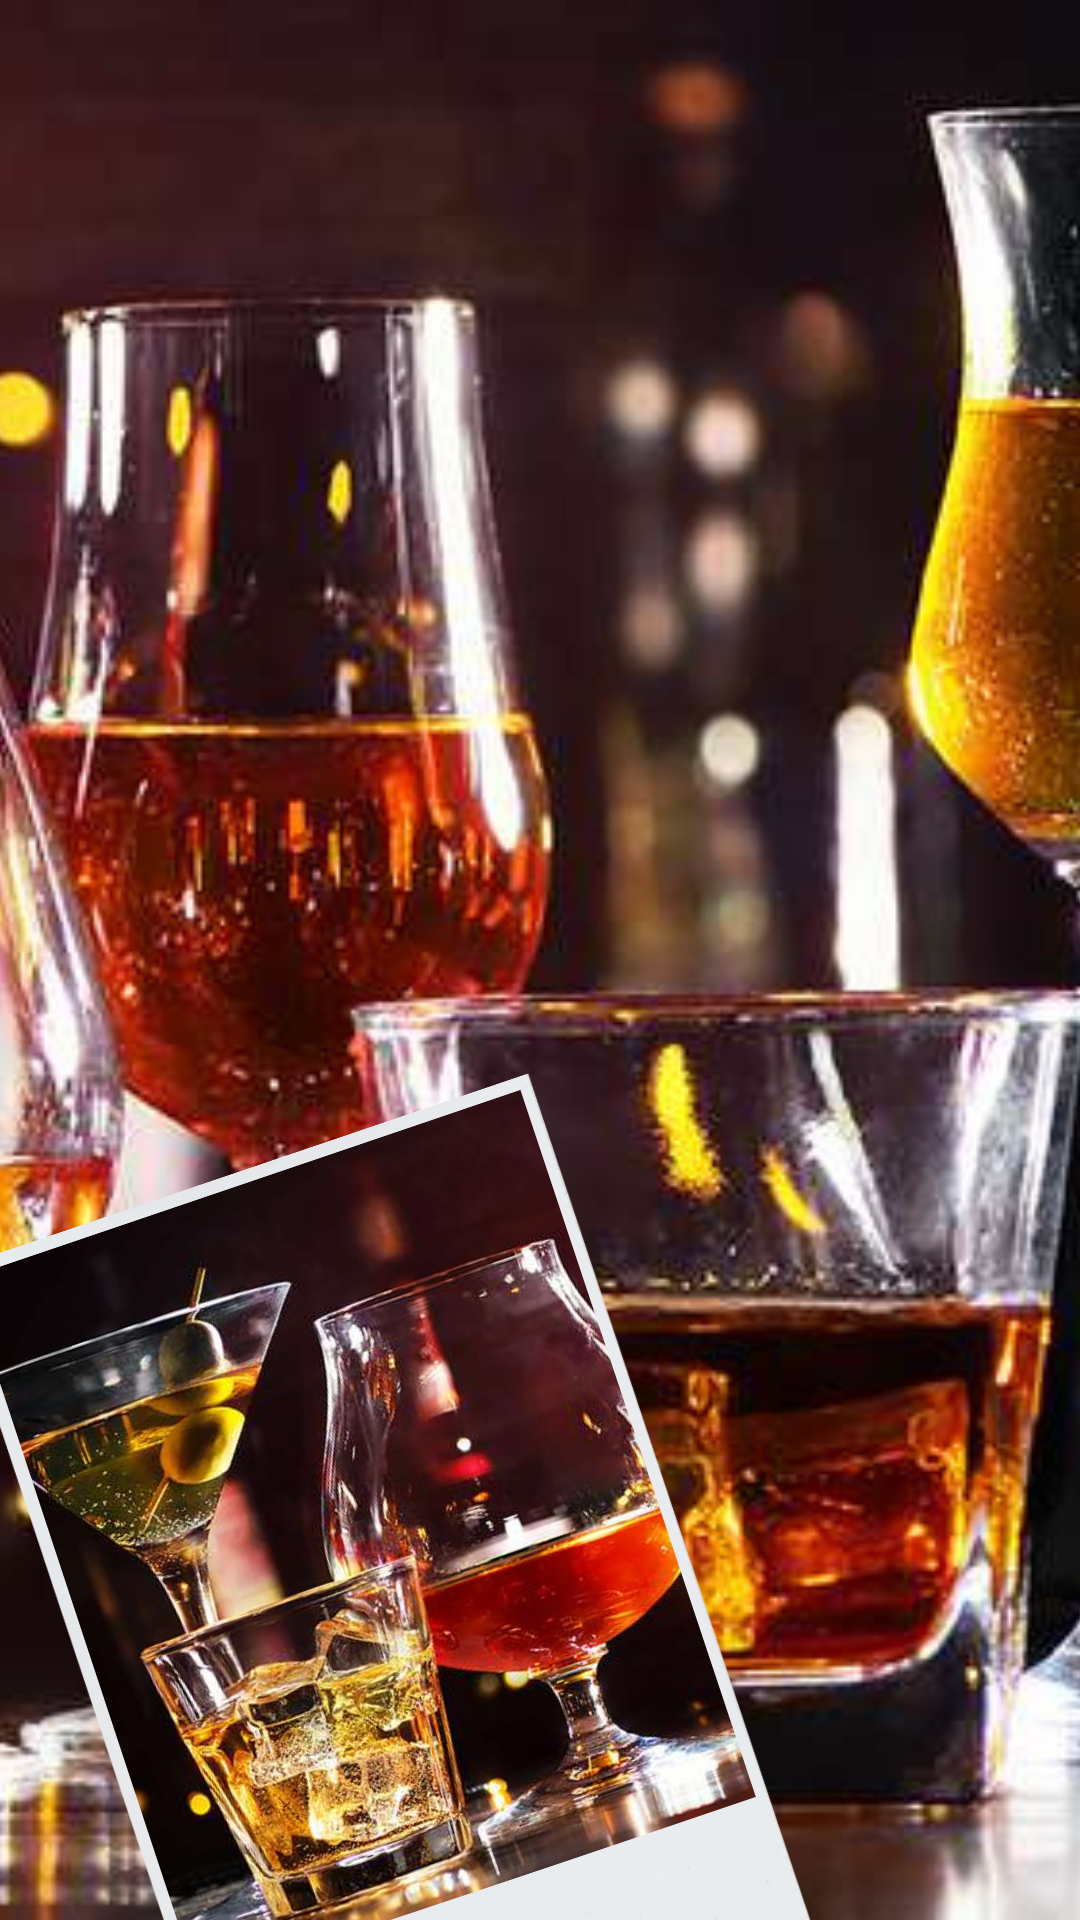 The 10 most-consumed alcoholic drinks have been identified